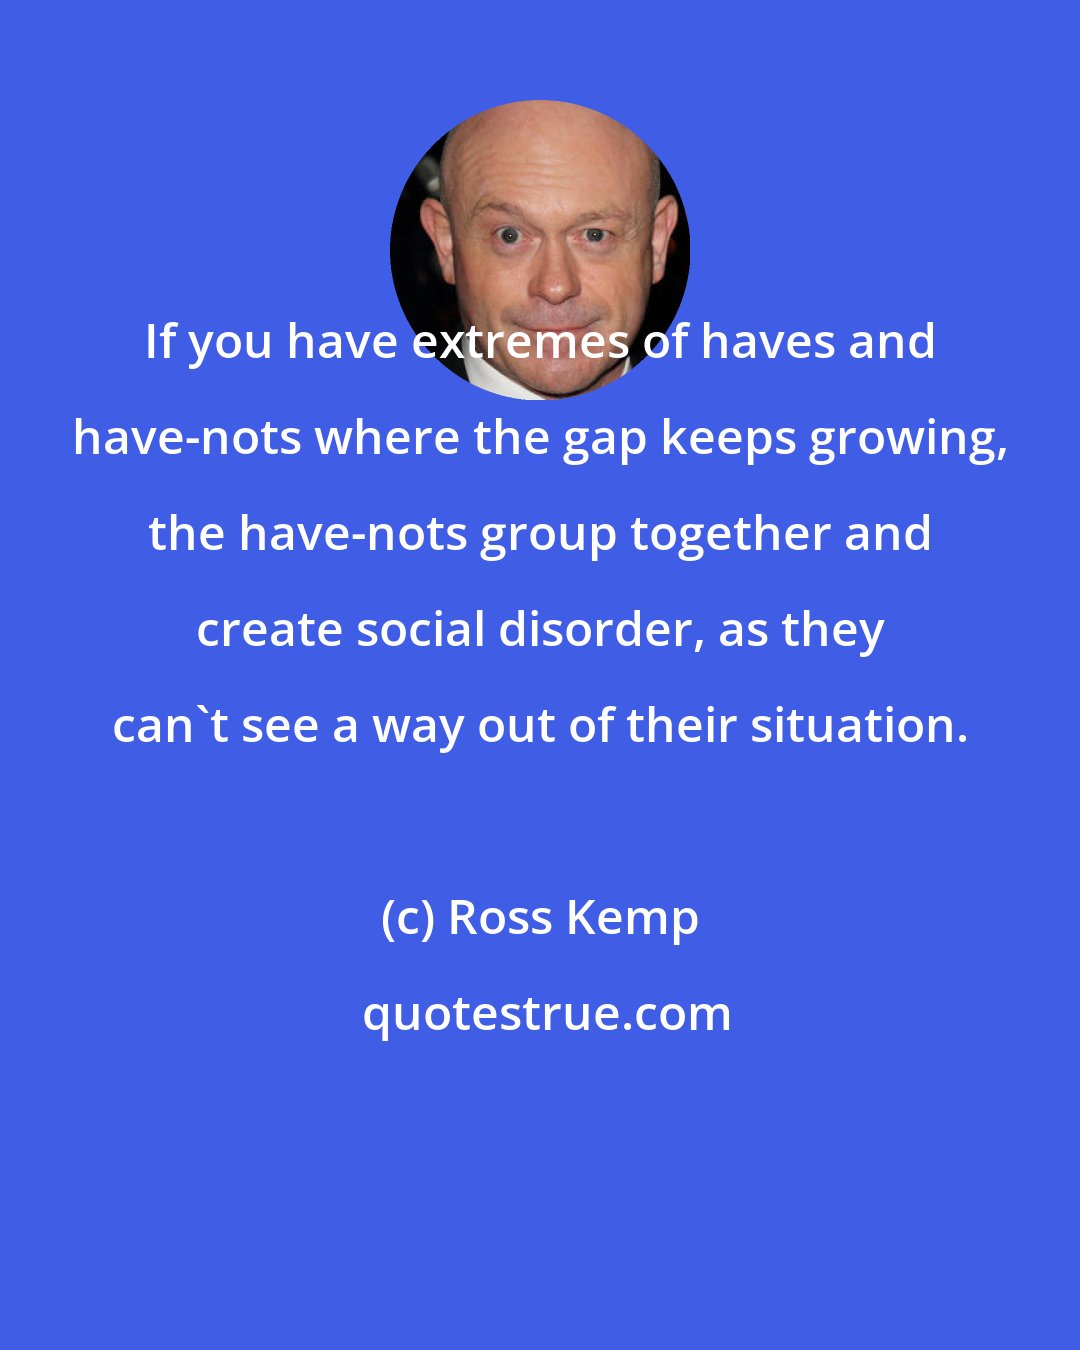 Ross Kemp: If you have extremes of haves and have-nots where the gap keeps growing, the have-nots group together and create social disorder, as they can't see a way out of their situation.